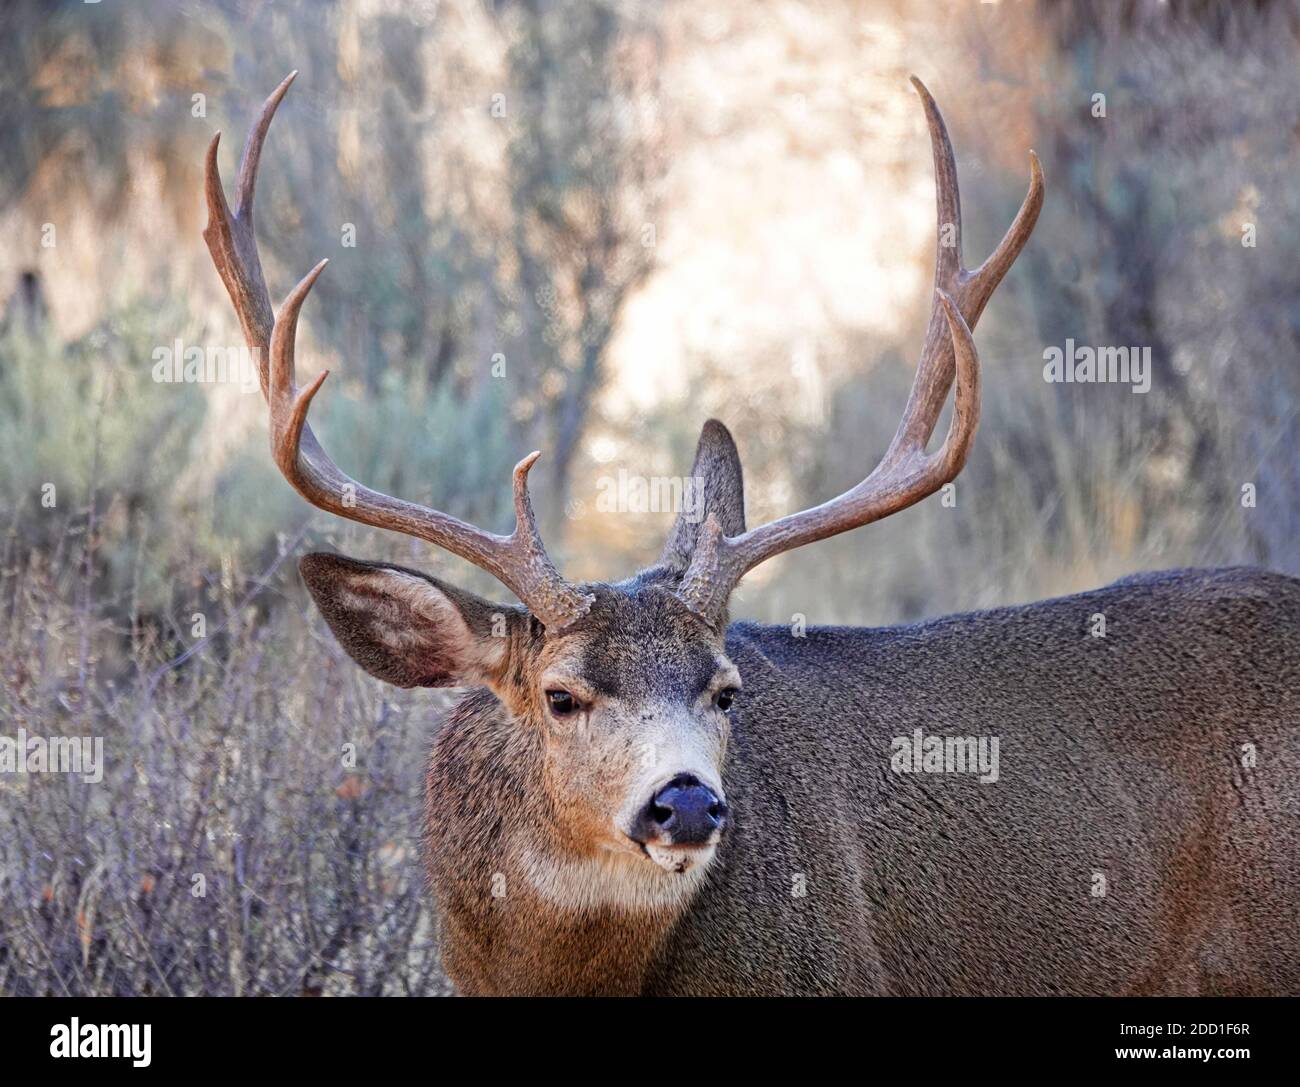 A large mule deer buck feeding on wild browse and shrubs in a rural setting in central Oregon near the Cascade Mountains. Stock Photo